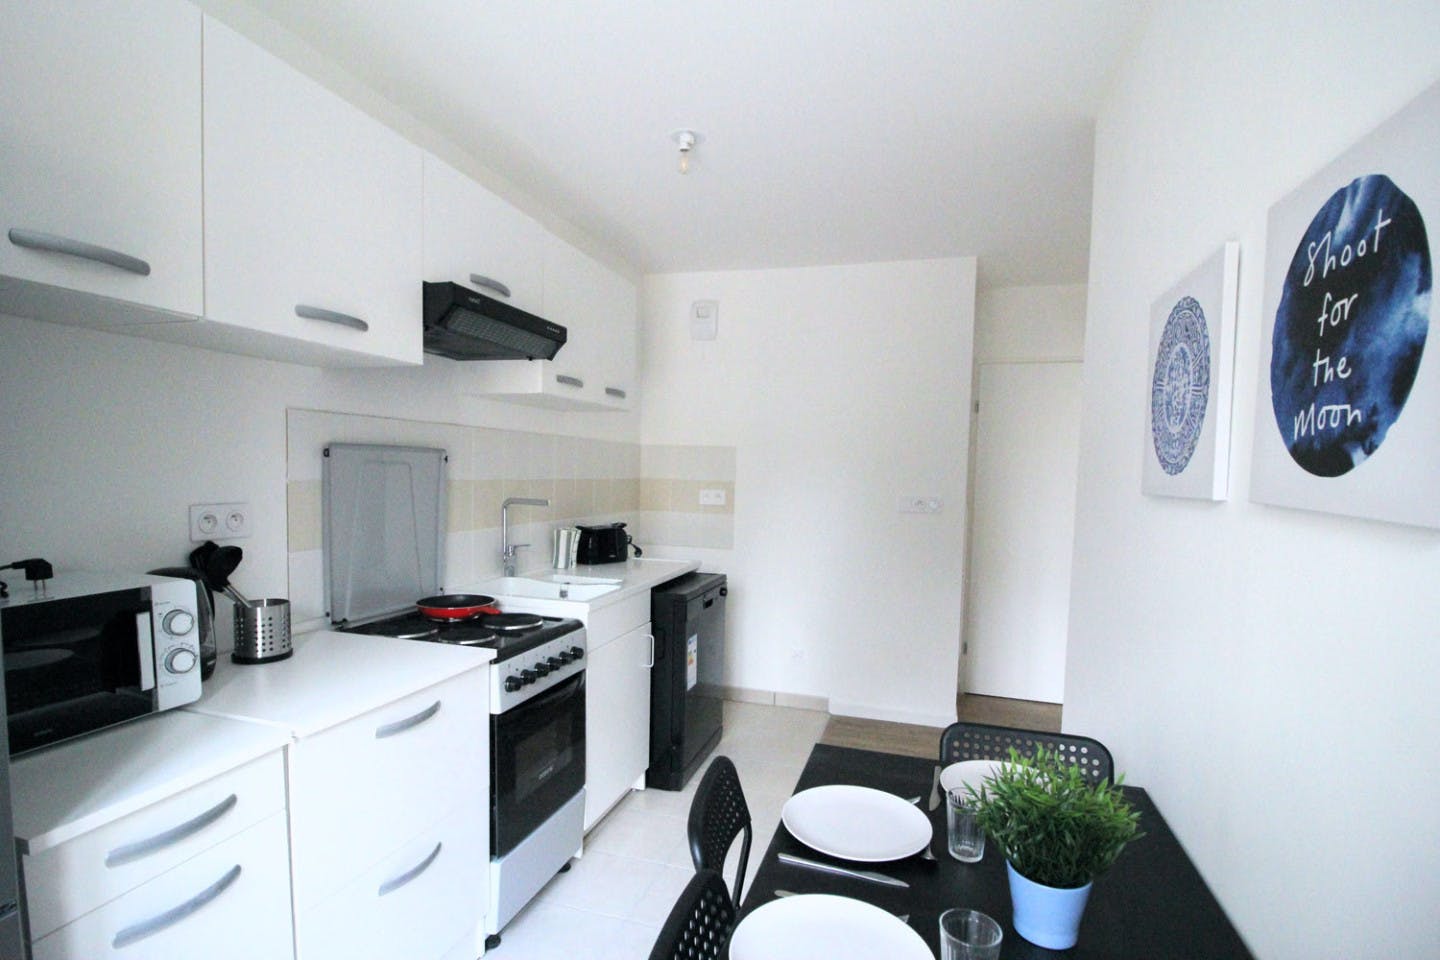 Spacious 4 bedroom apartment located in Clichy